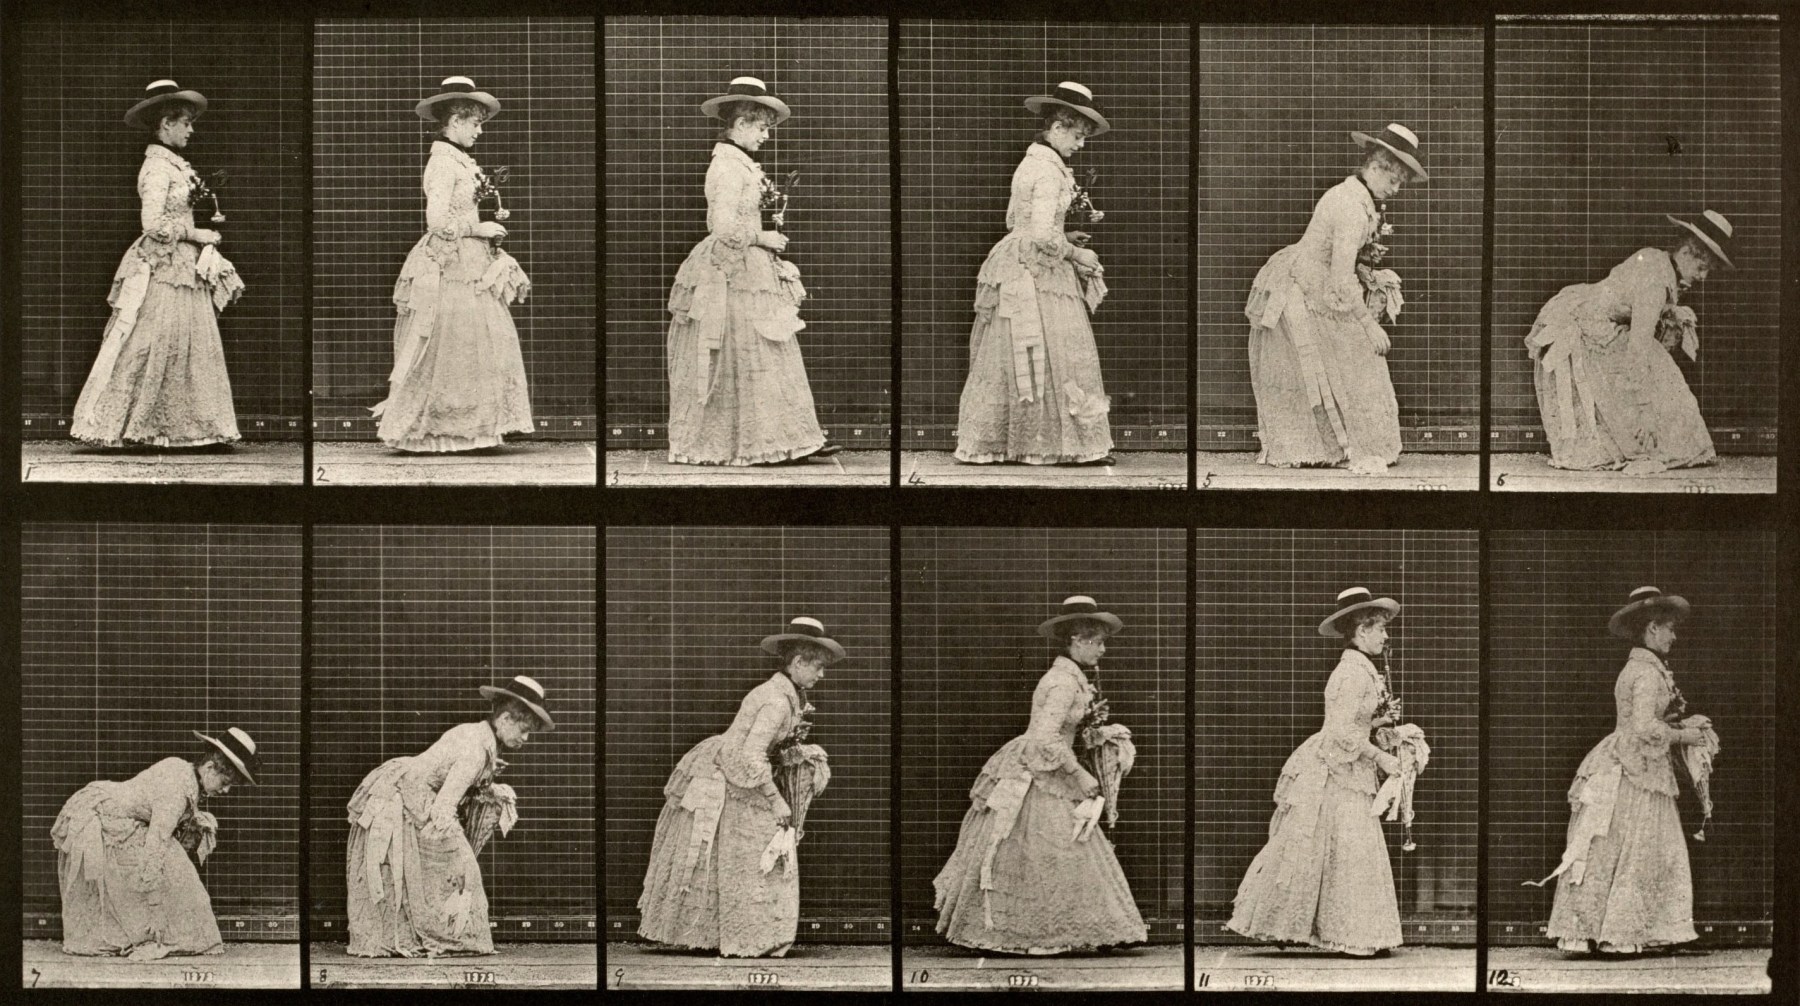 Series of black and white image of a woman in 19th century dress bending down to pick up her handkerchief